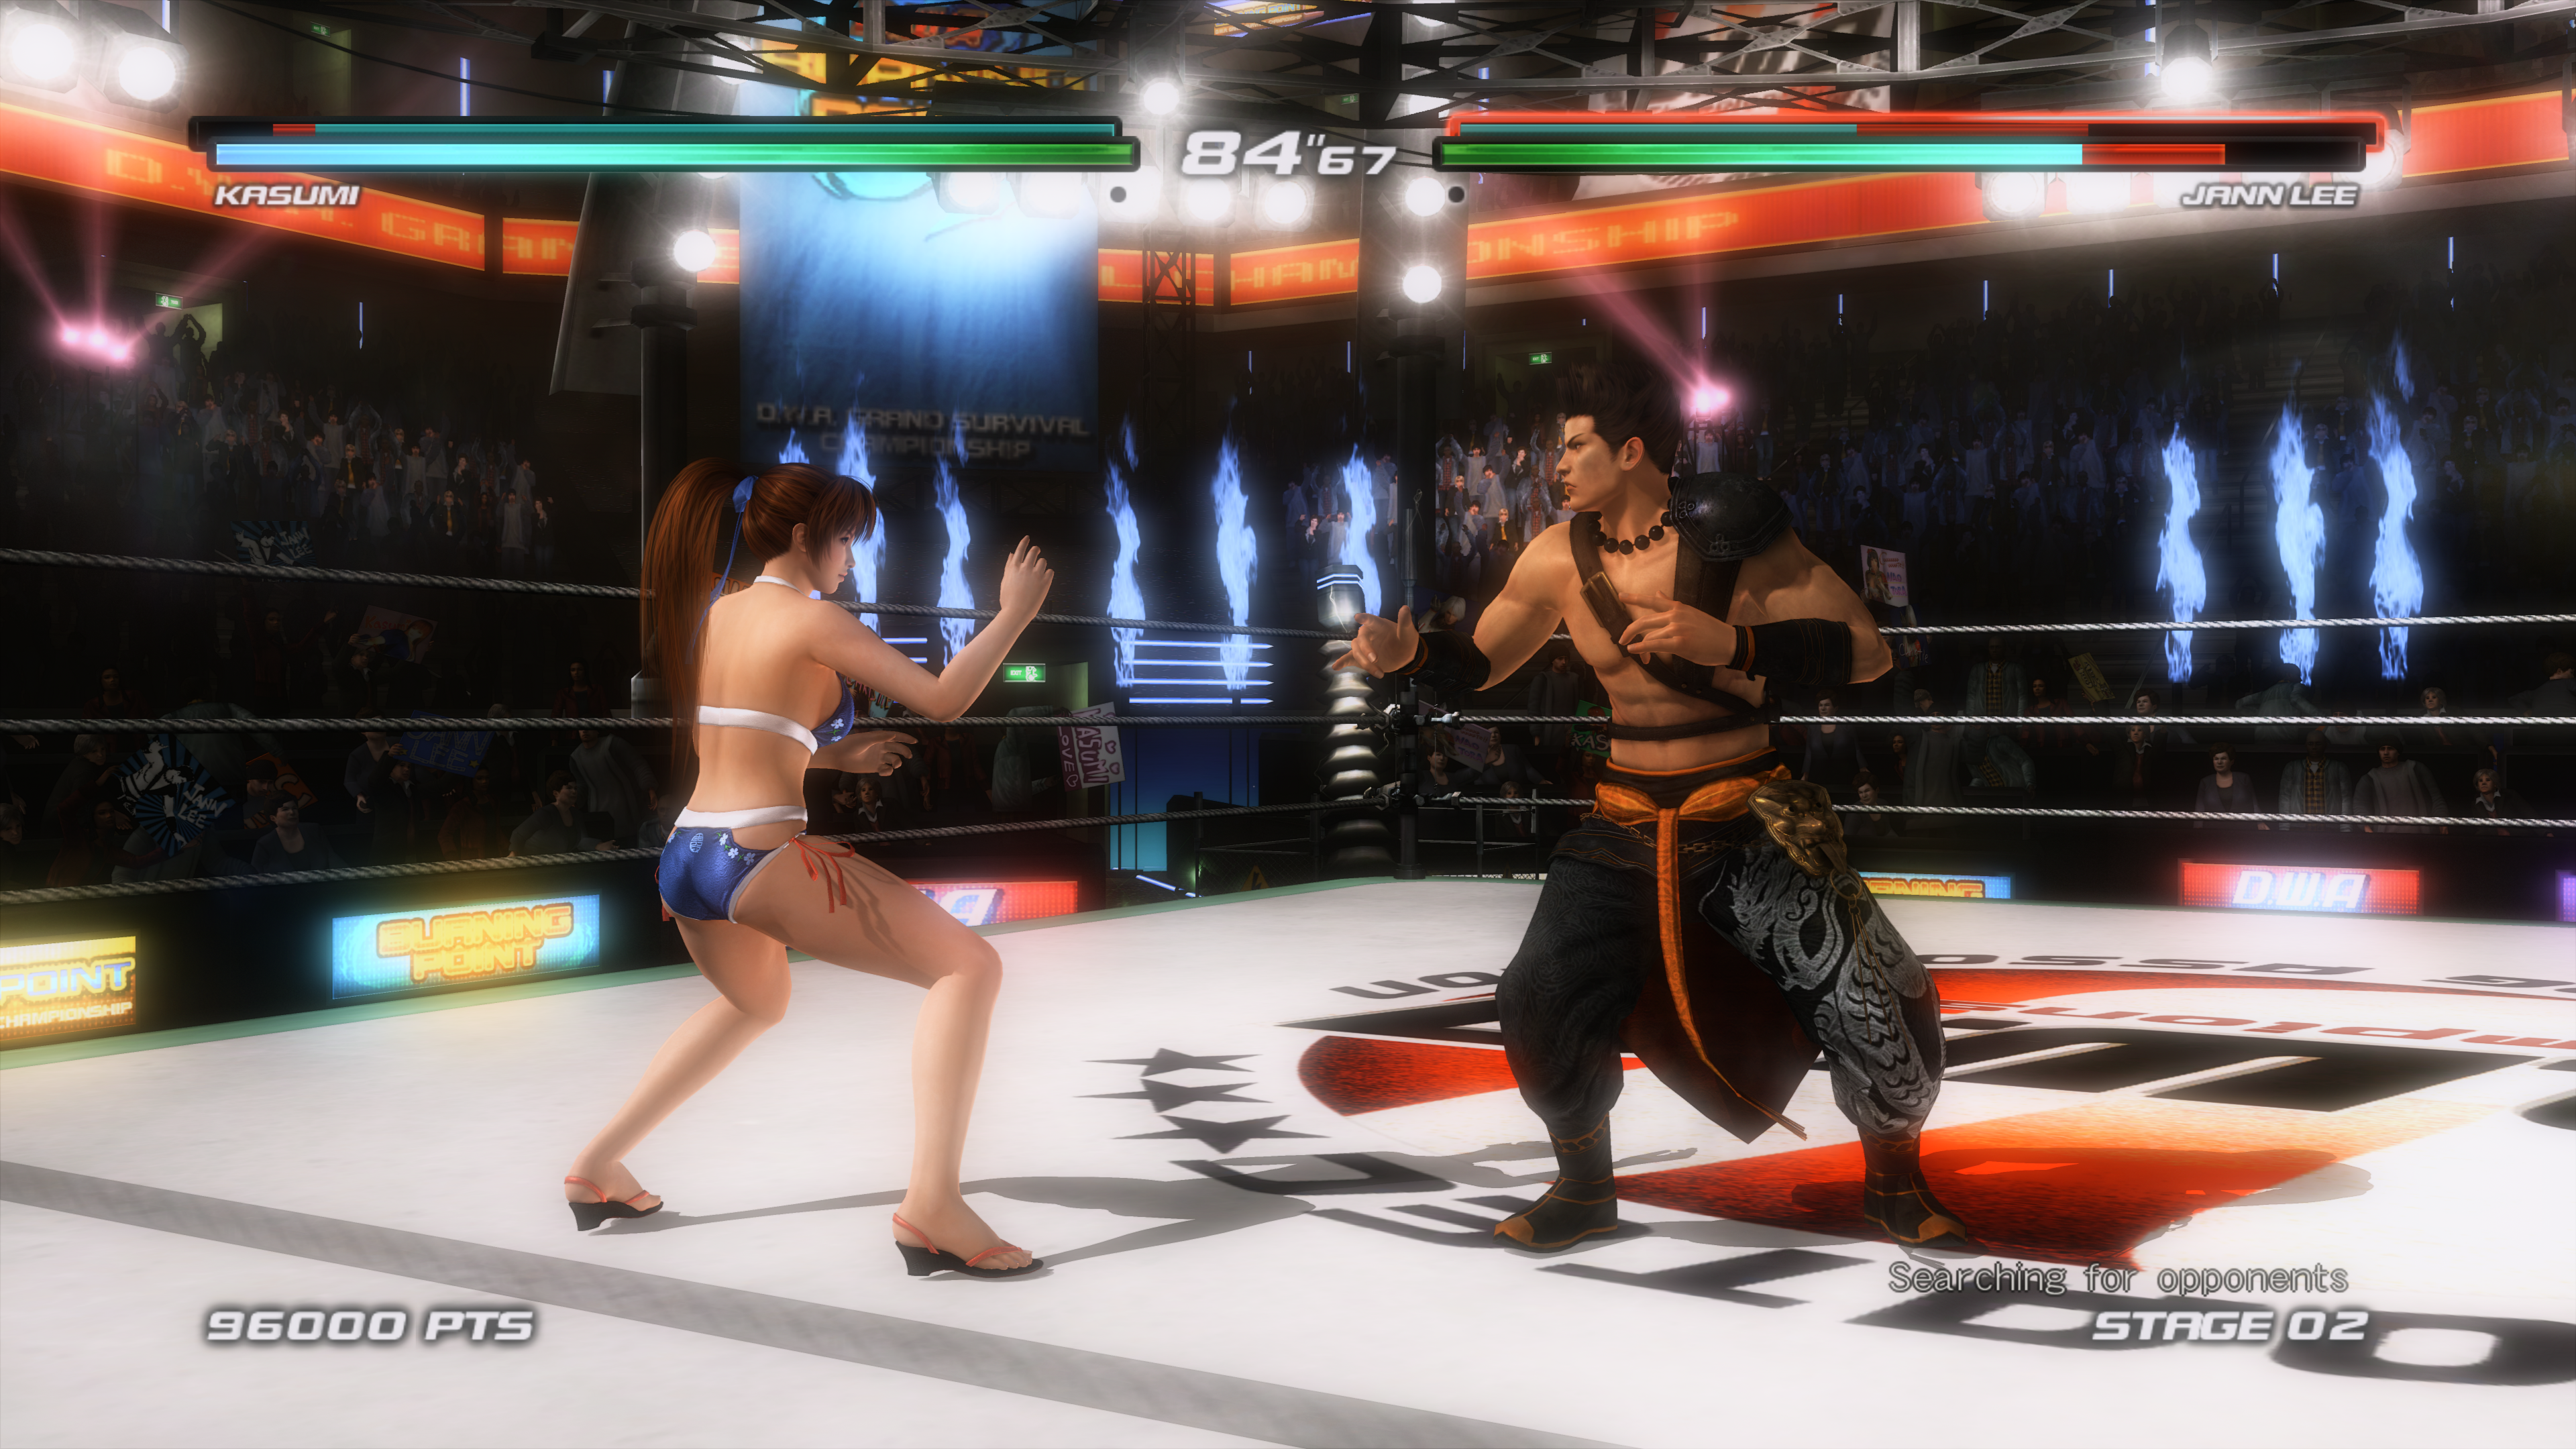 How To Use Sweetfx On Doa5lr Steam Im Having A Problem With Sweetfx 